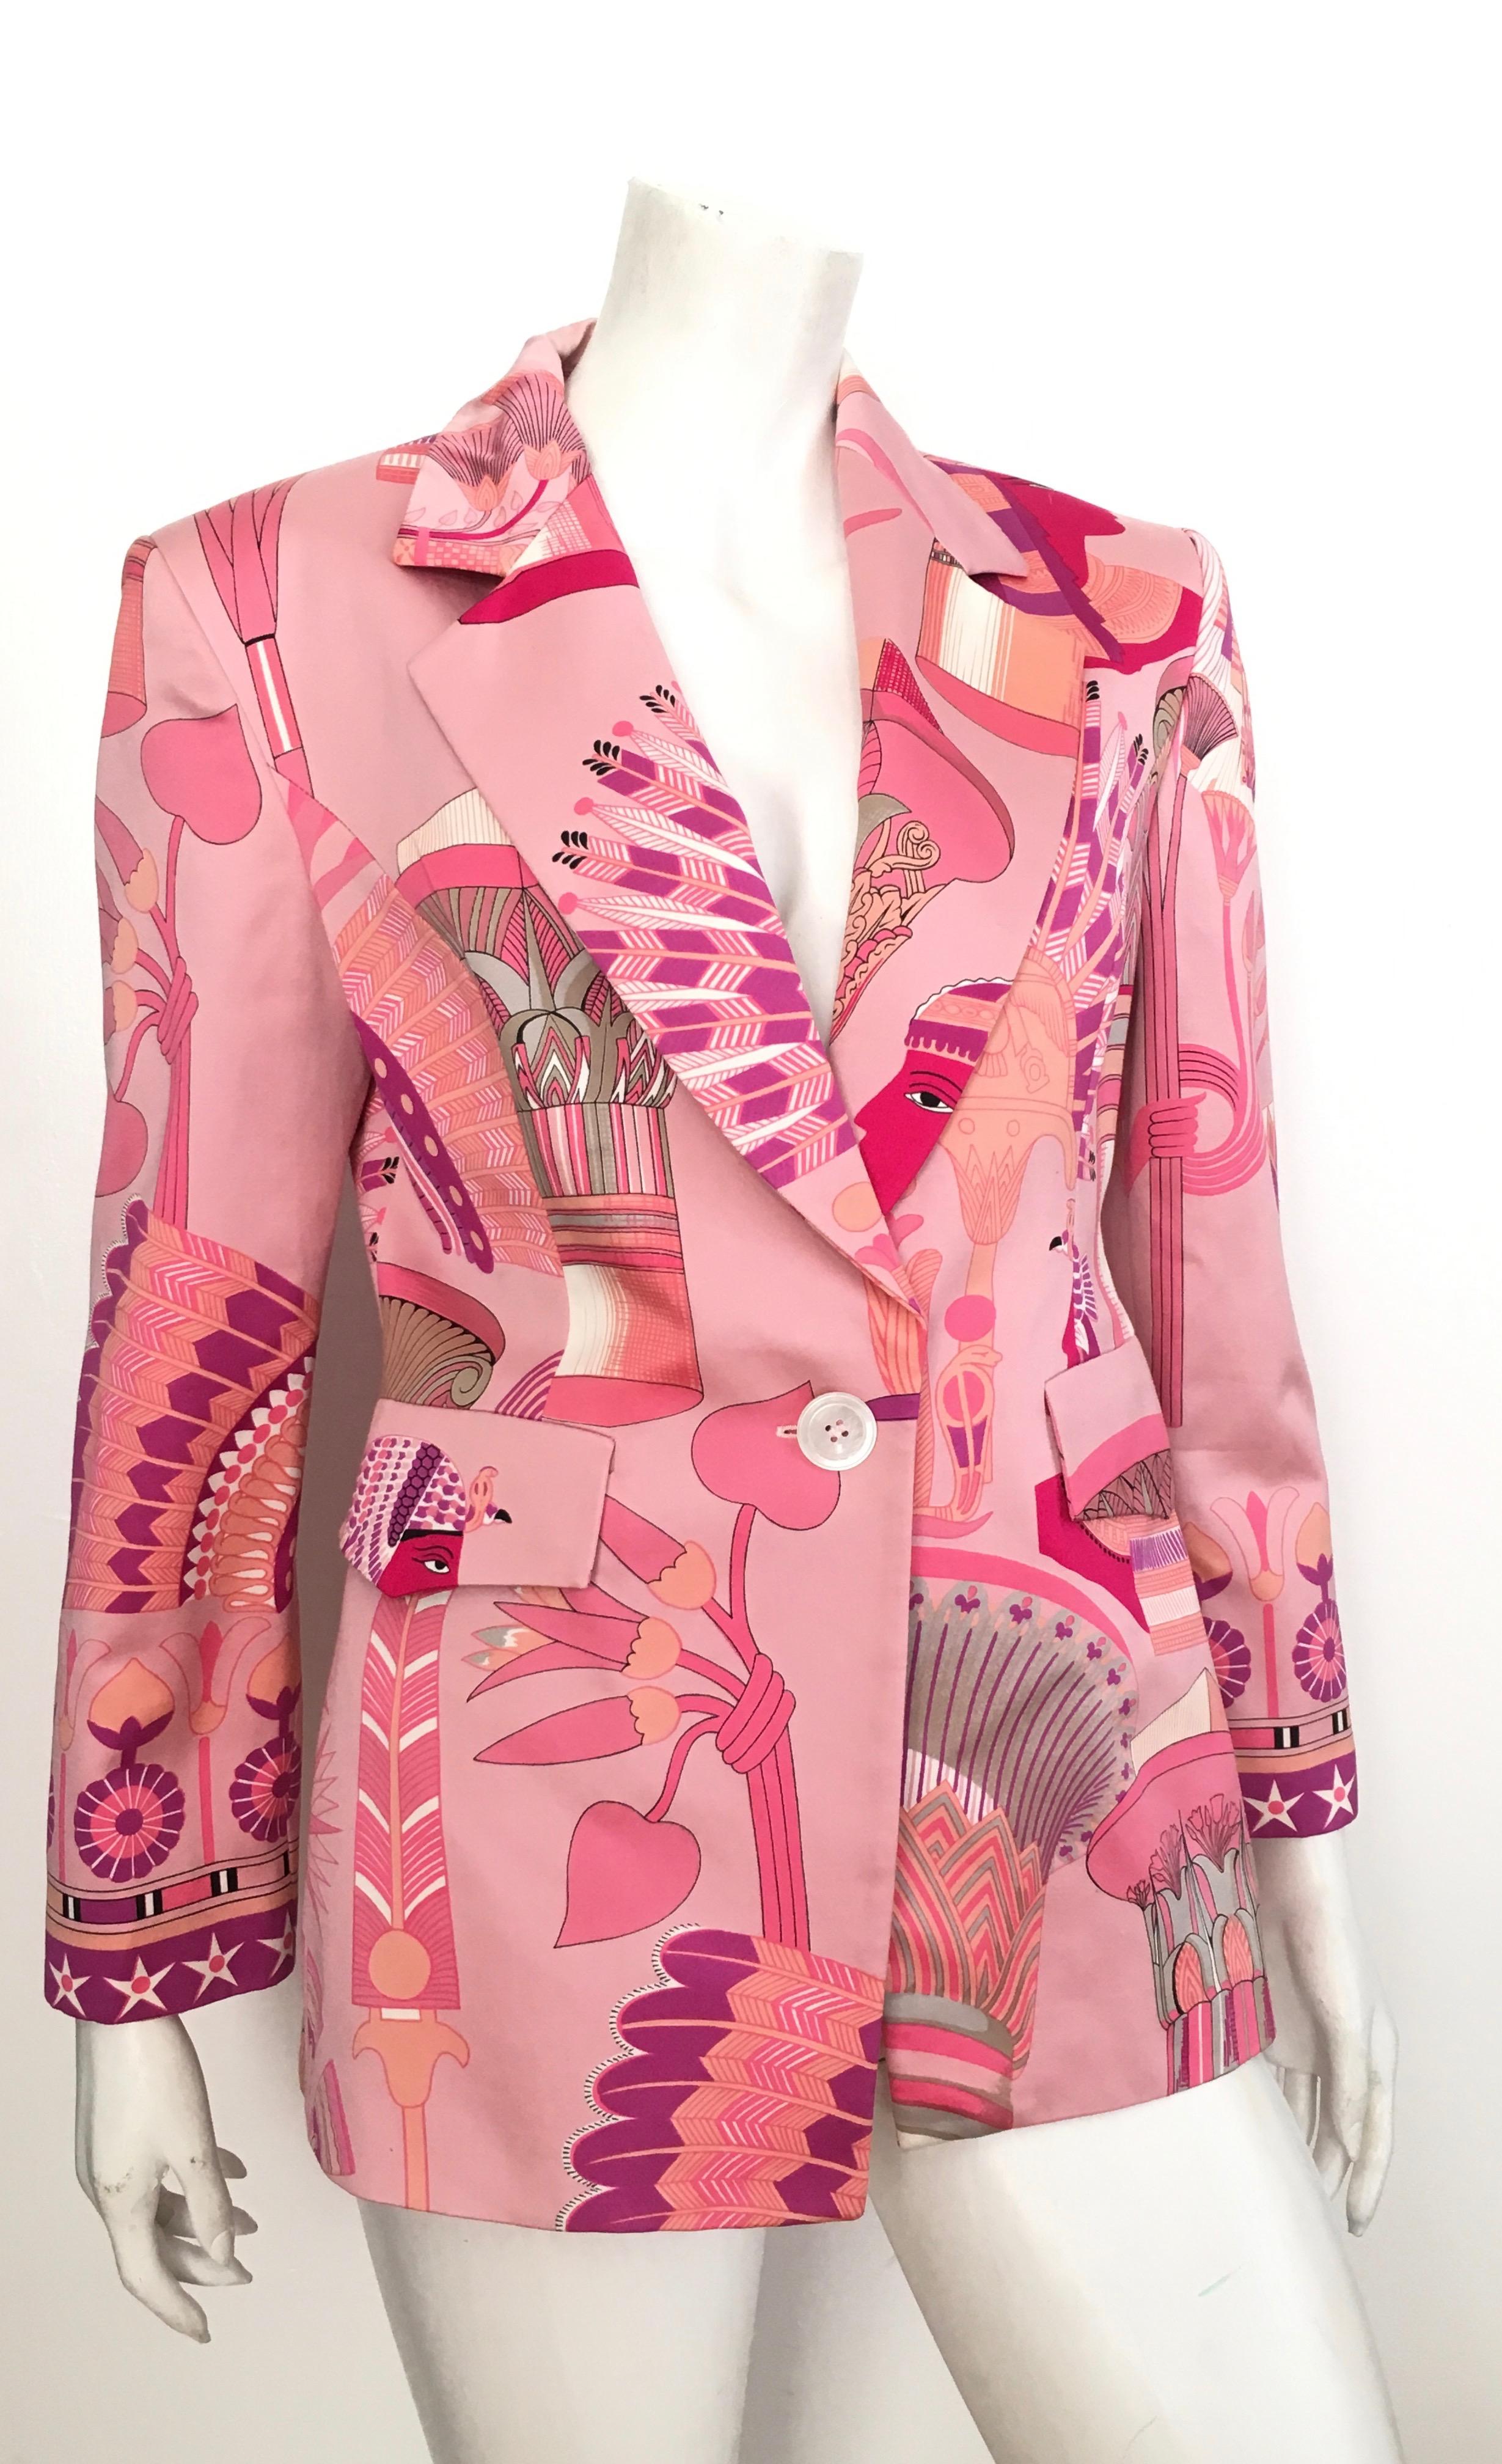 Byblos 1990s cotton with the most fabulous Egyptian print jacket size 8.  
Italian size 44.
Made in Italy.
This gorgeous cotton jacket with various shades of pink is just stunning.
Talk about turning heads when you wear this anywhere......
Wear this